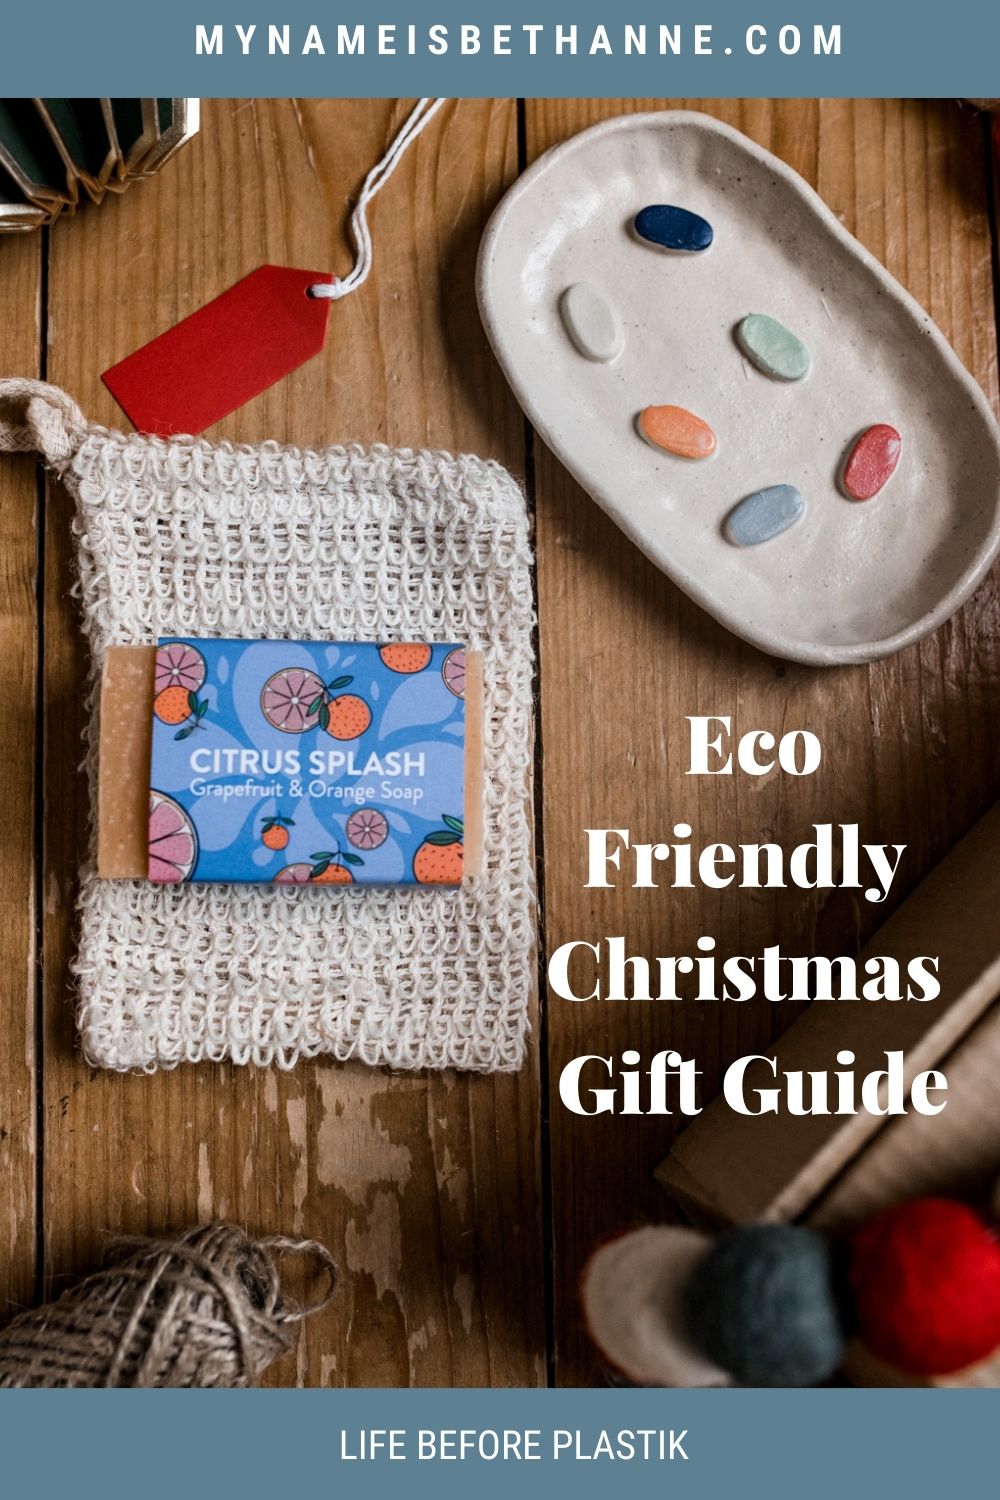 Life Before Plastik - Eco Friendly Christmas Gifts